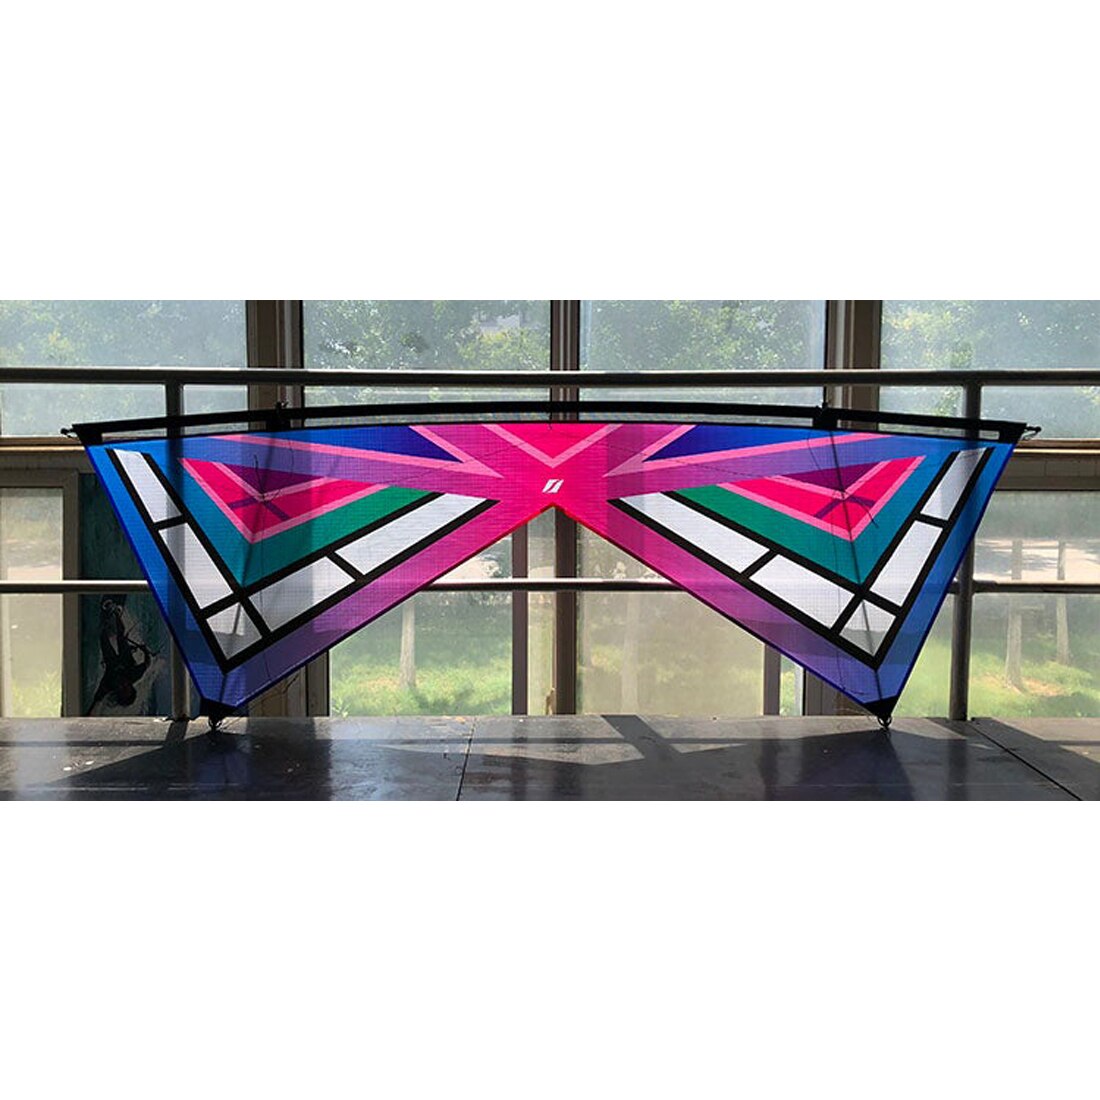 Freilein Quad Line Stunt Kite Printing Windrider Professional 2.38m Large Sport Kites 8 Colors Available With Handls Line Sets